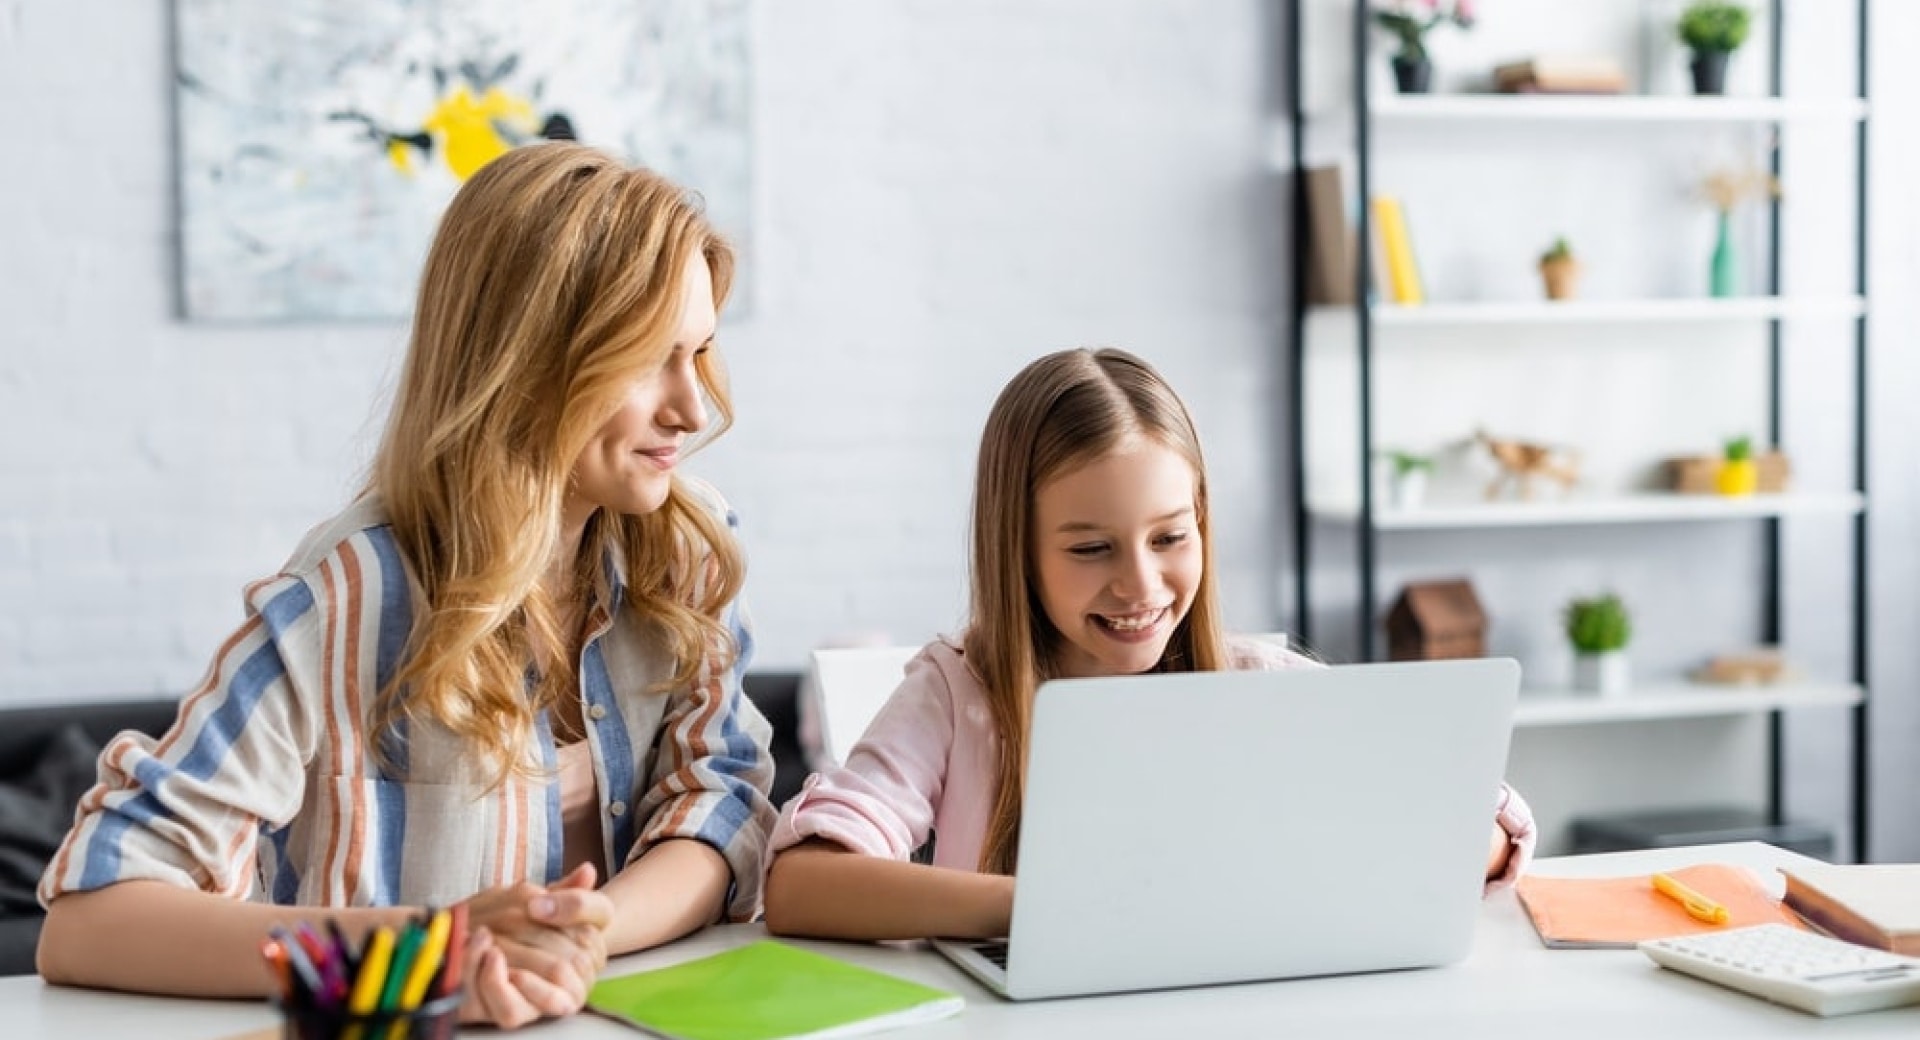 3 Ways Schools Can Connect with Their Communities Remotely